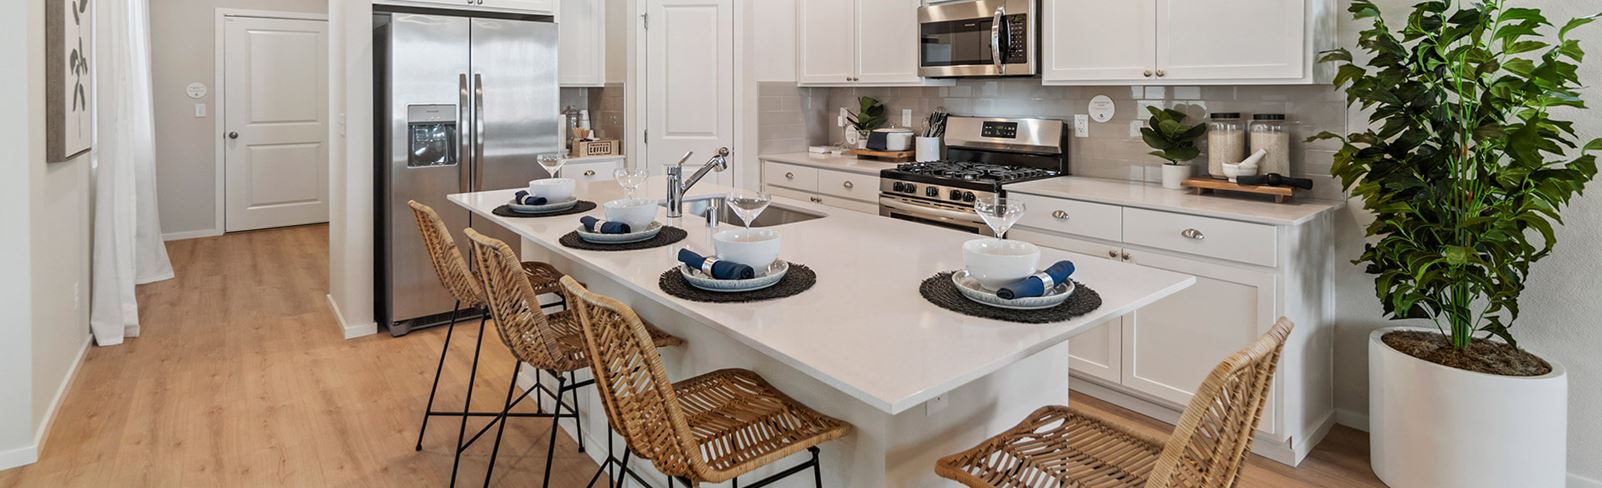 New home kitchen by Lennar Homes in Tehaleh Glacier Pointe Community